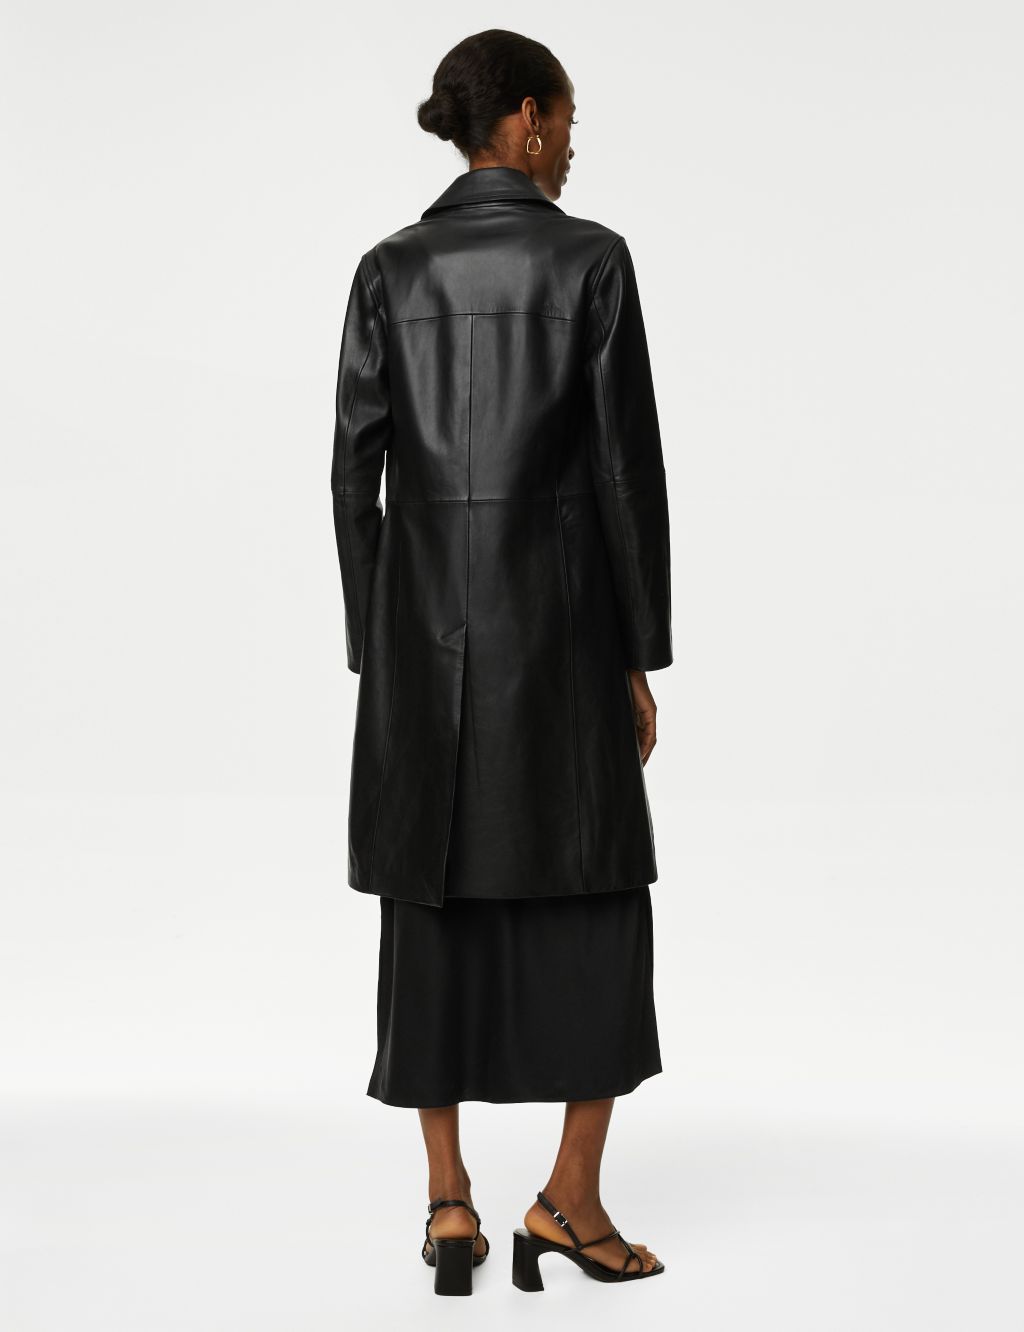 Leather Collared Car Coat image 5